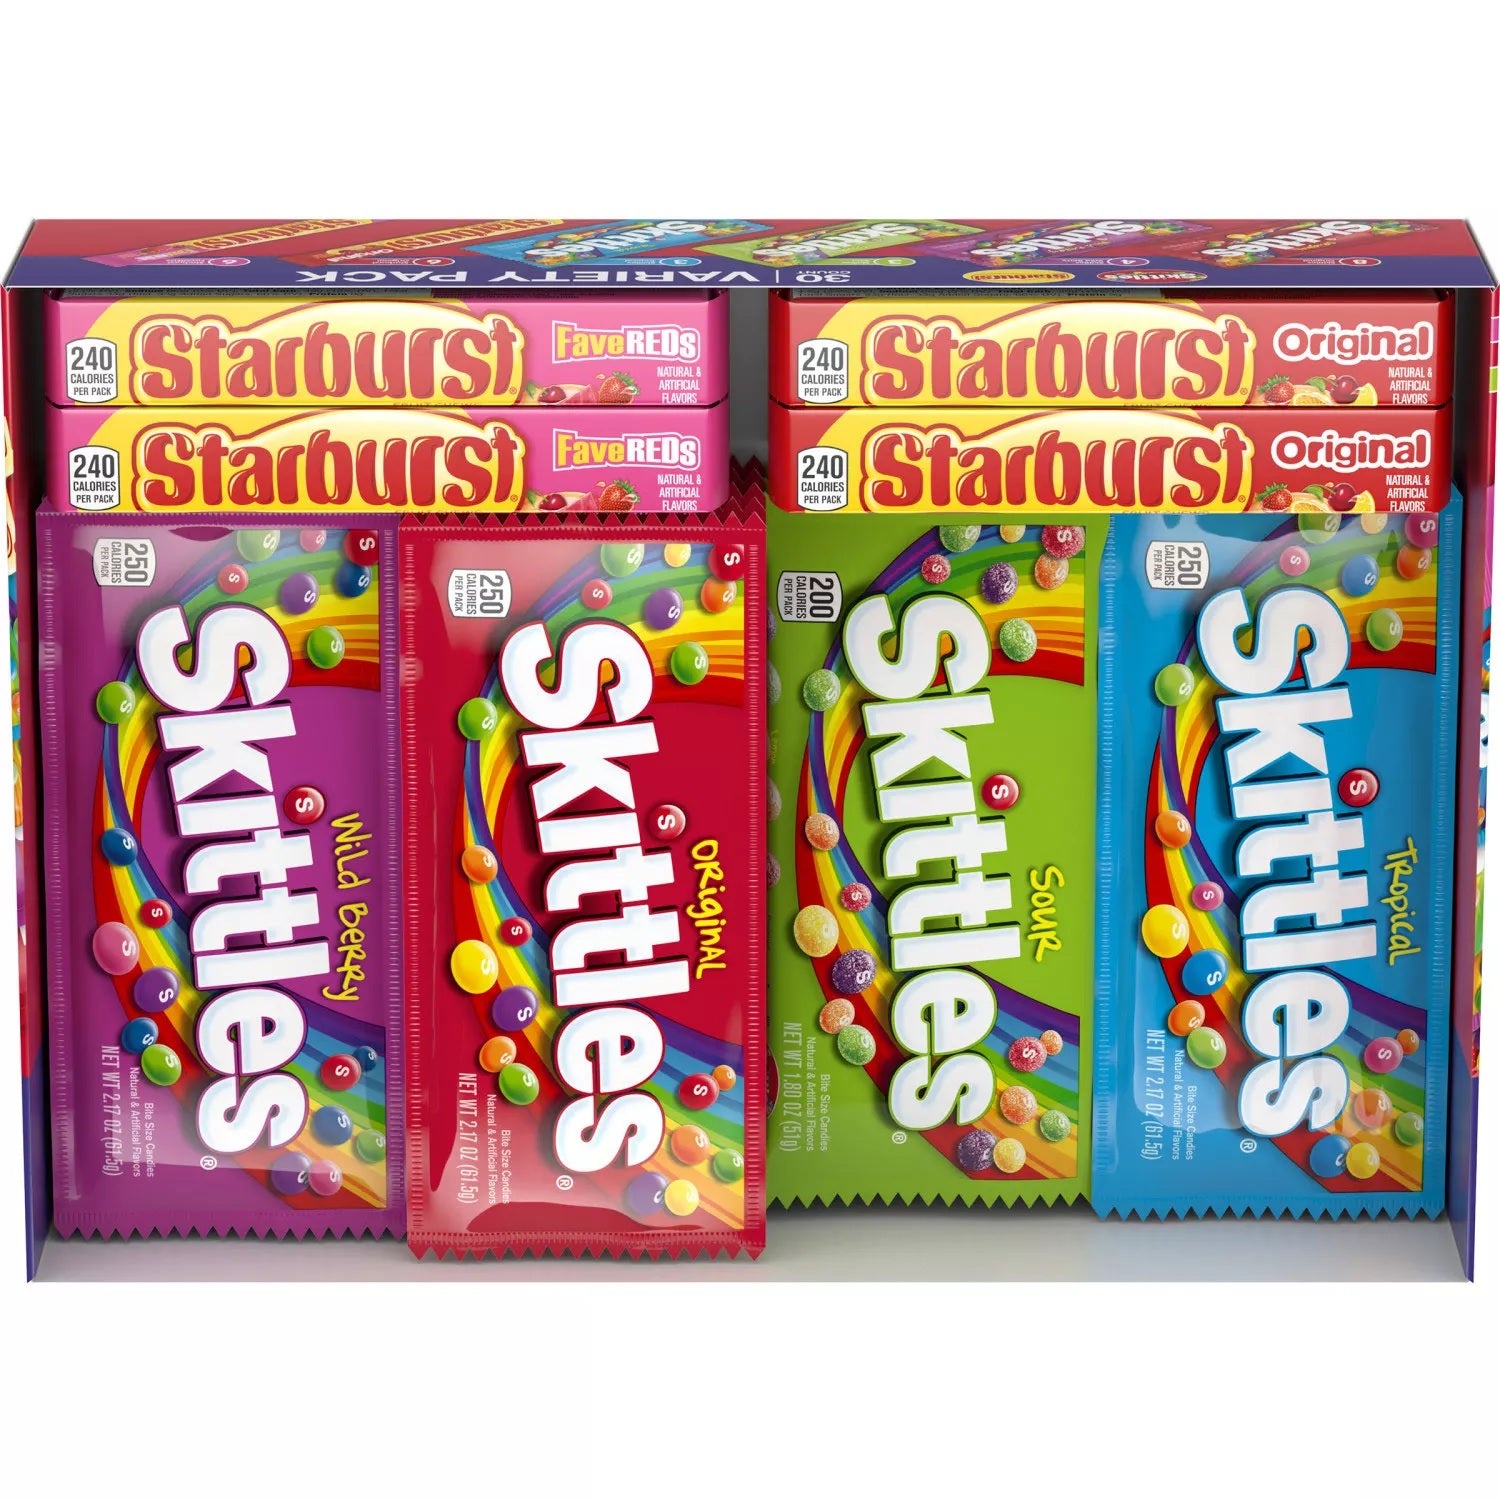 Starburst and Skittles Chewy Candy Variety Box - 62.79oz/30pk